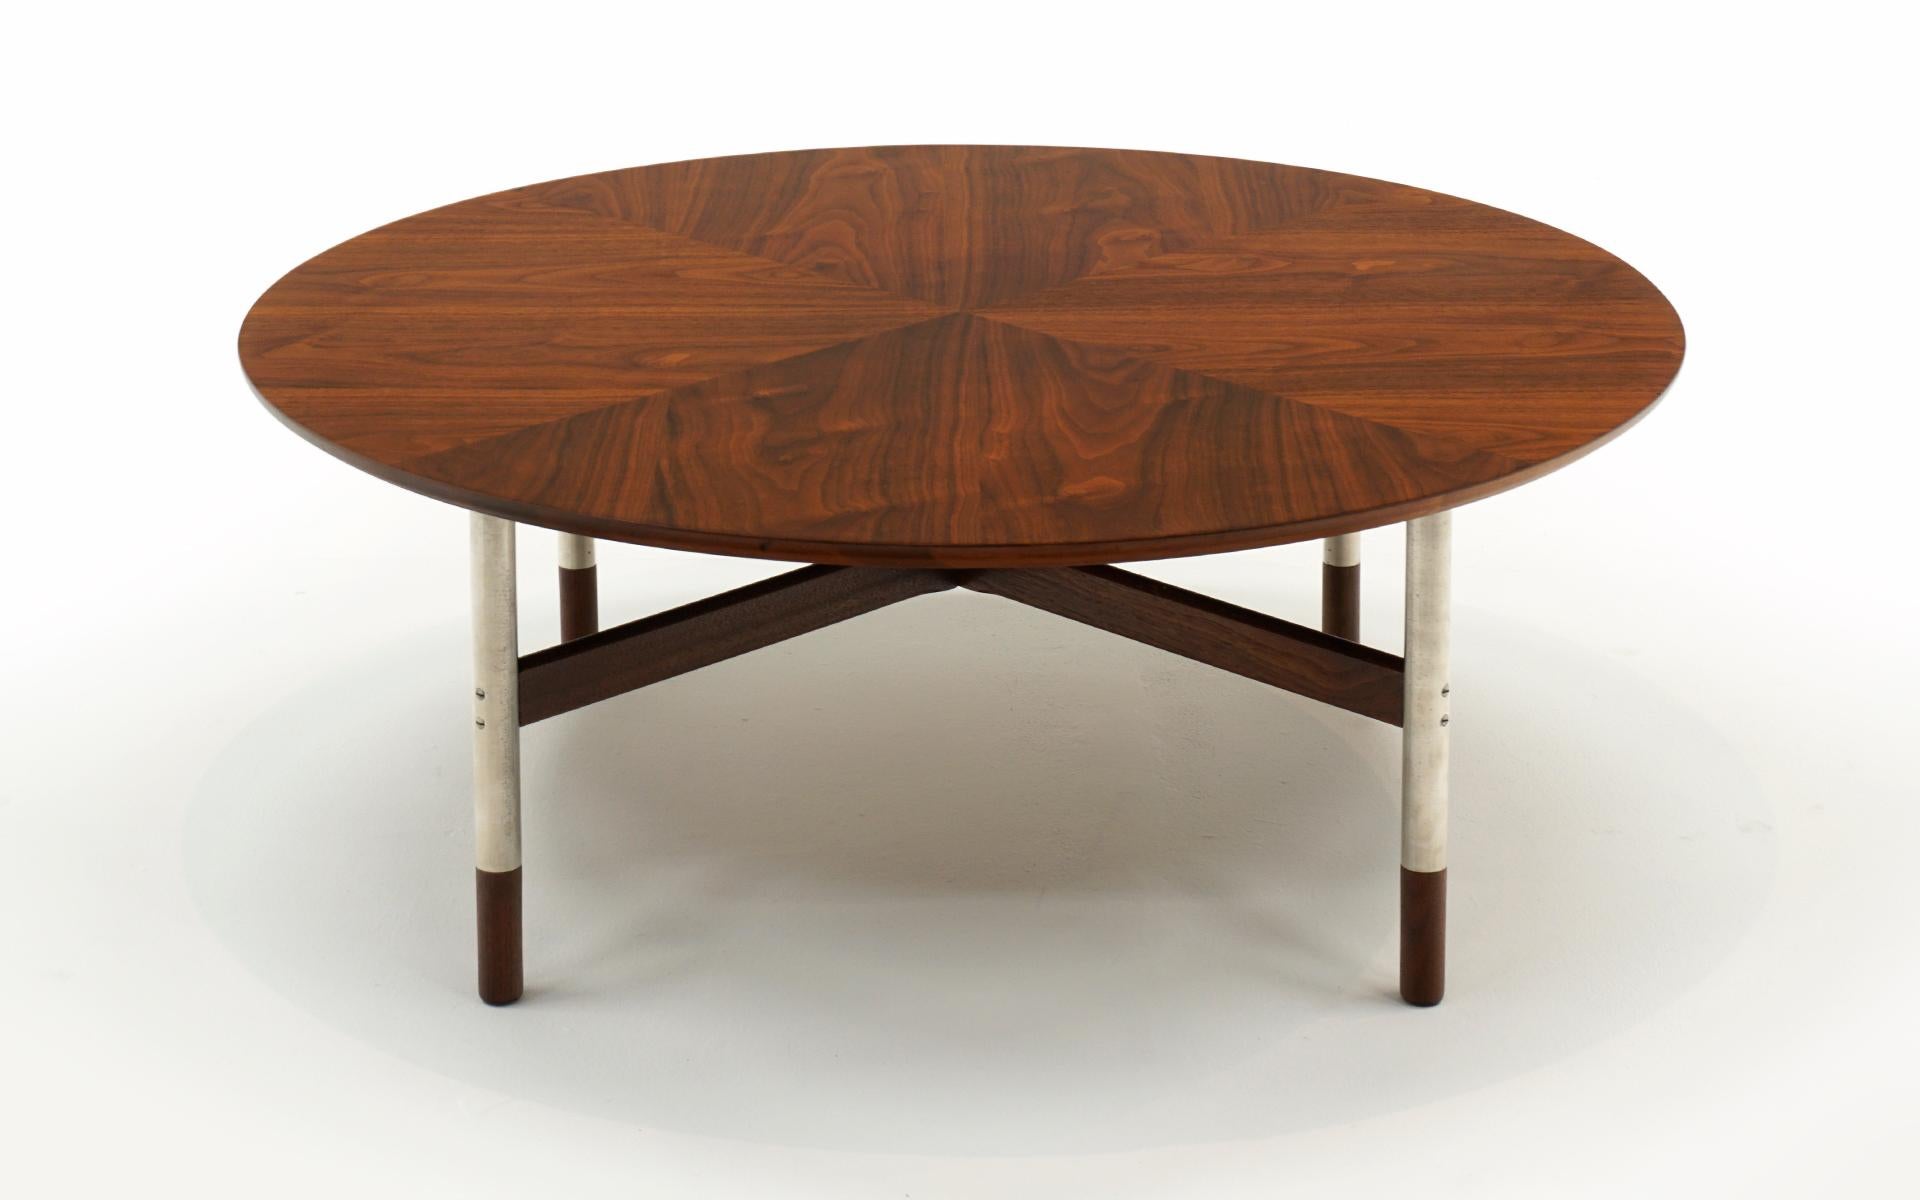 Round walnut coffee table in the style of Finn Juhl or Arne Vodder. The top is supported by Satin Chrome Legs with walnut feet. Expertly refinished and ready to use.